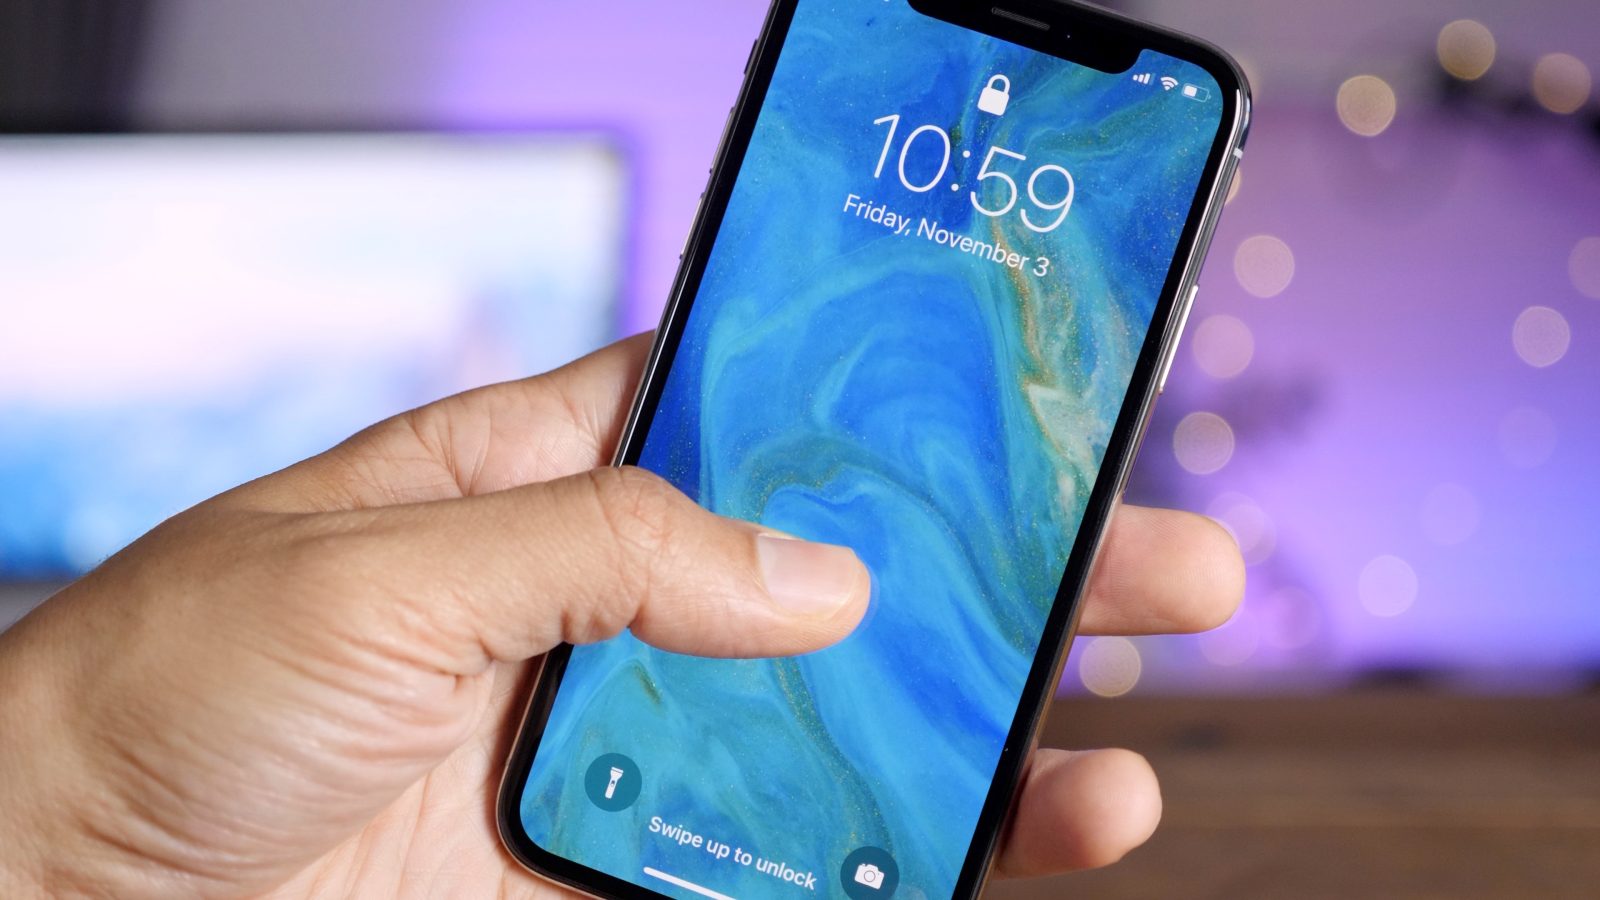 KGI: iPhone X demand & growth strong into 2018, iPhone 8 ...